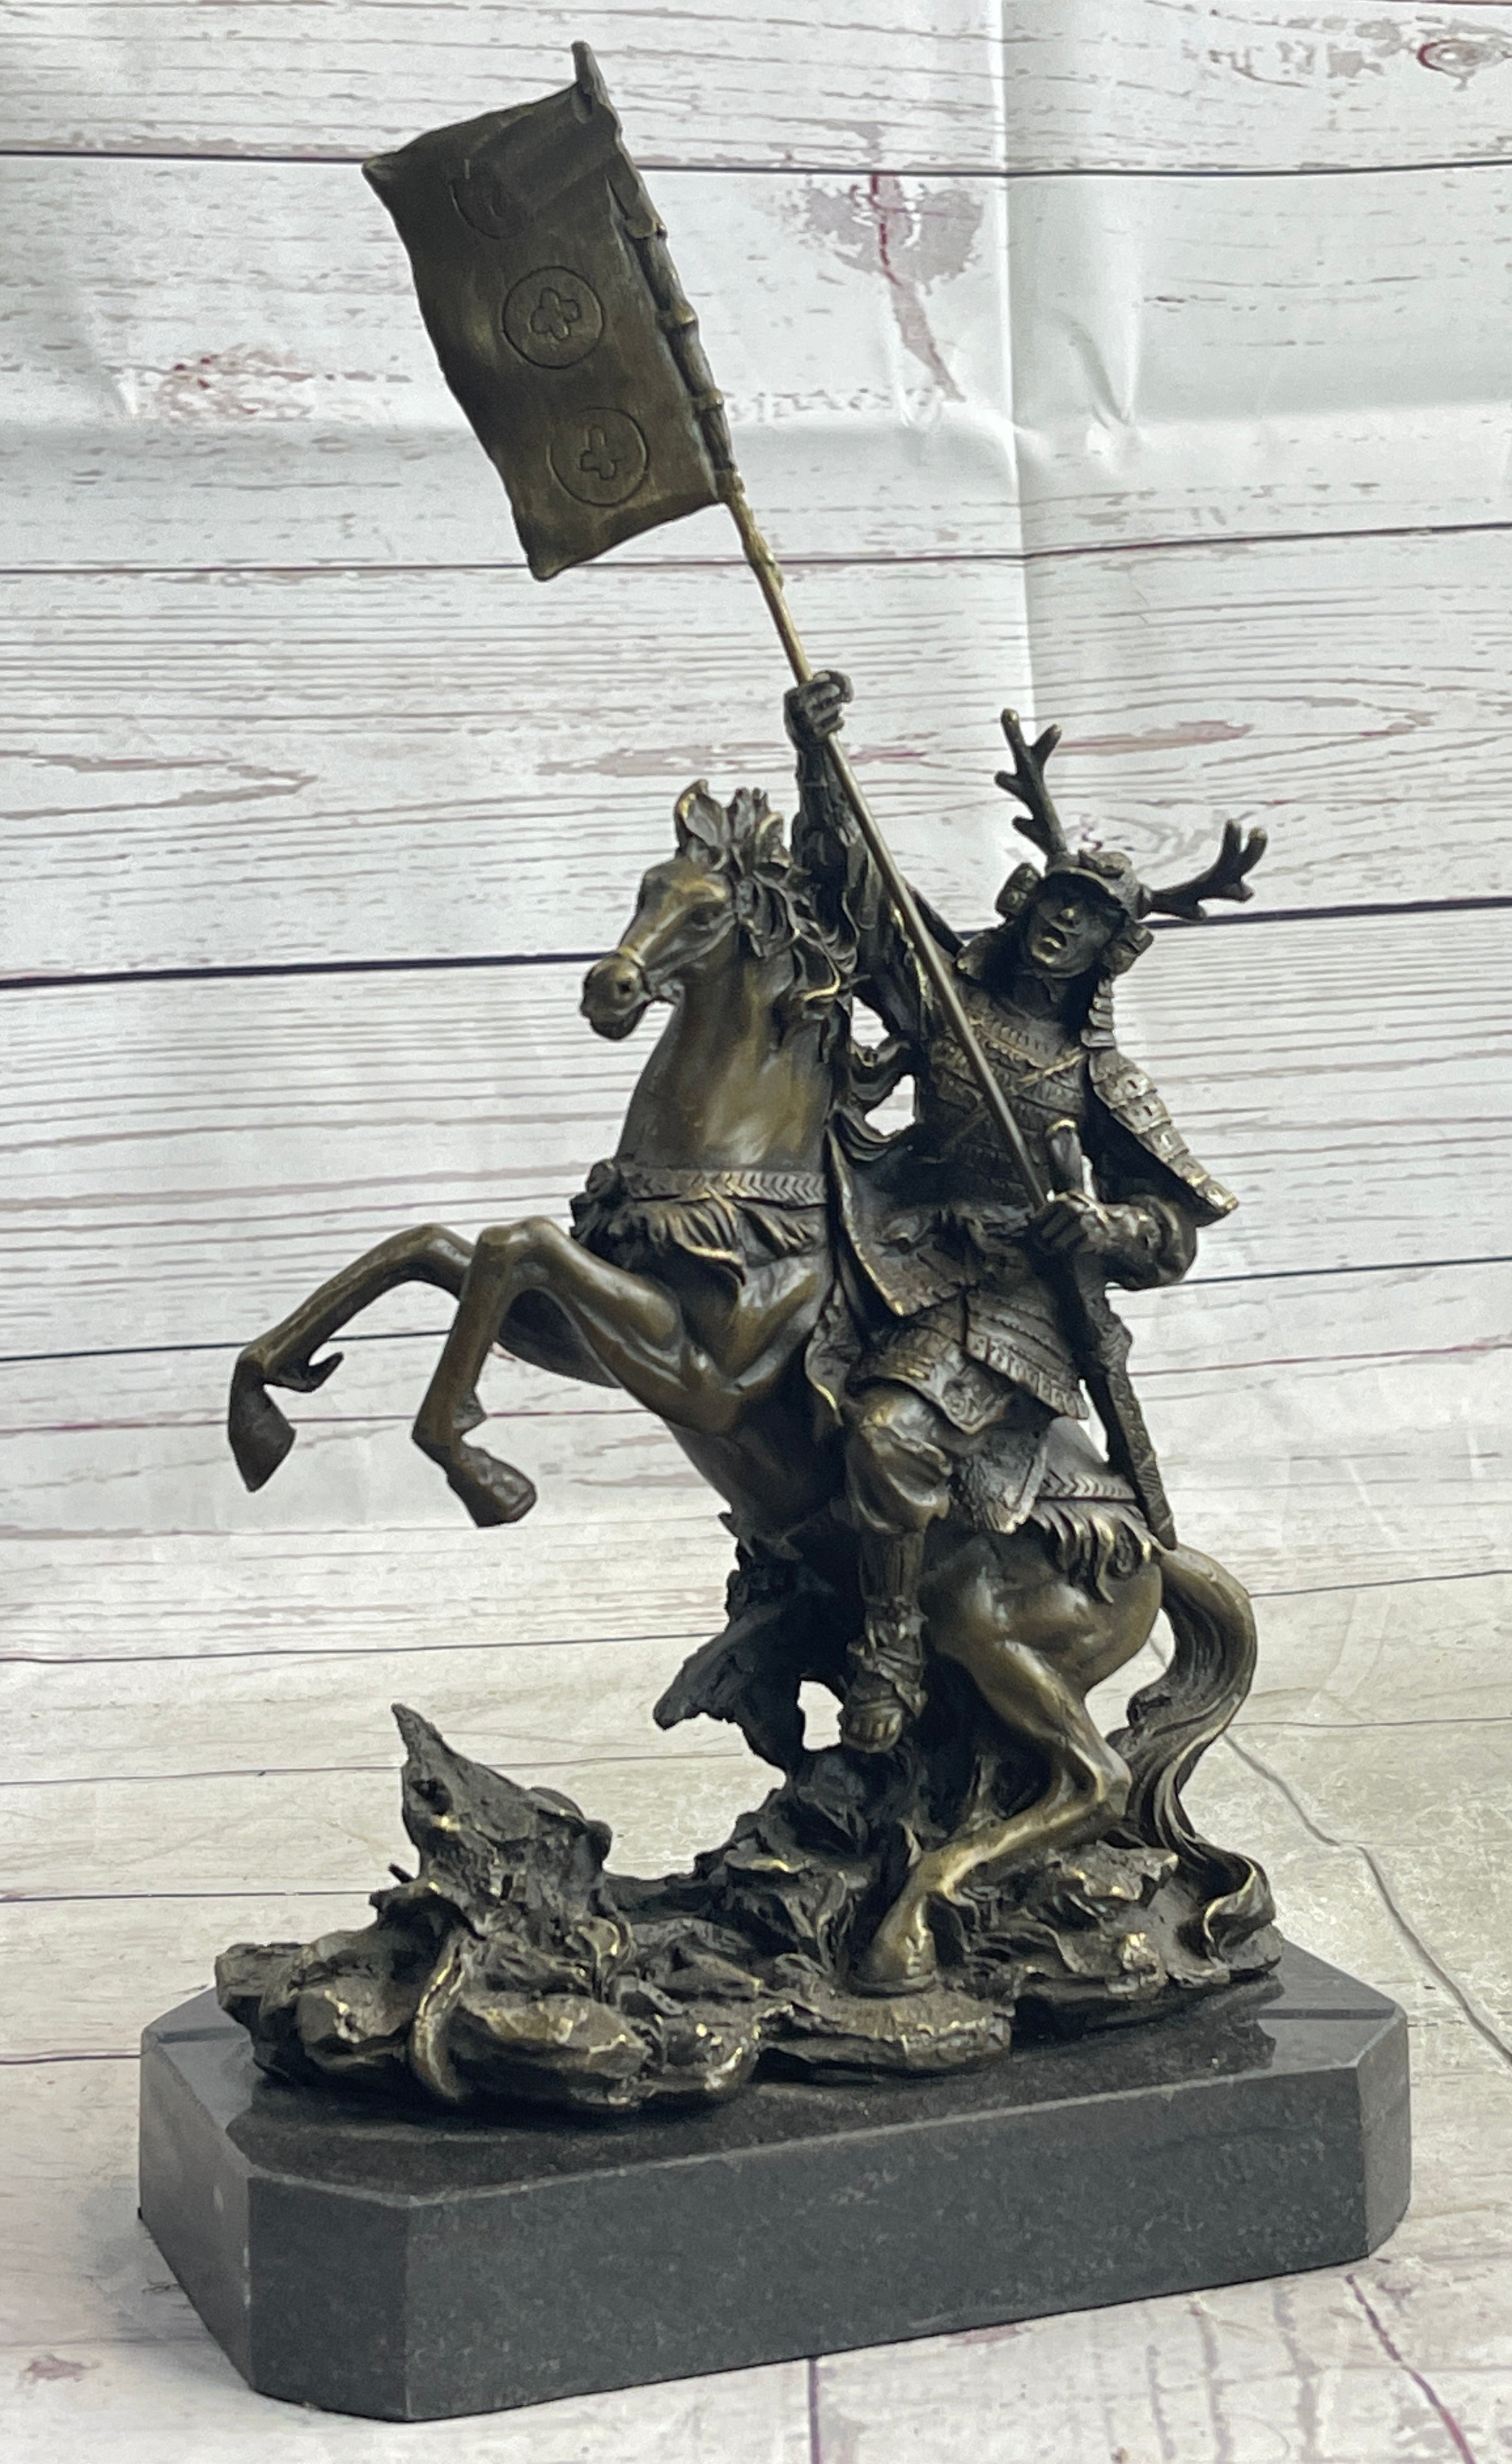 Hot Cast Viking Warrior on Horse with a Flag Bronze Sculpture Statue Figurine